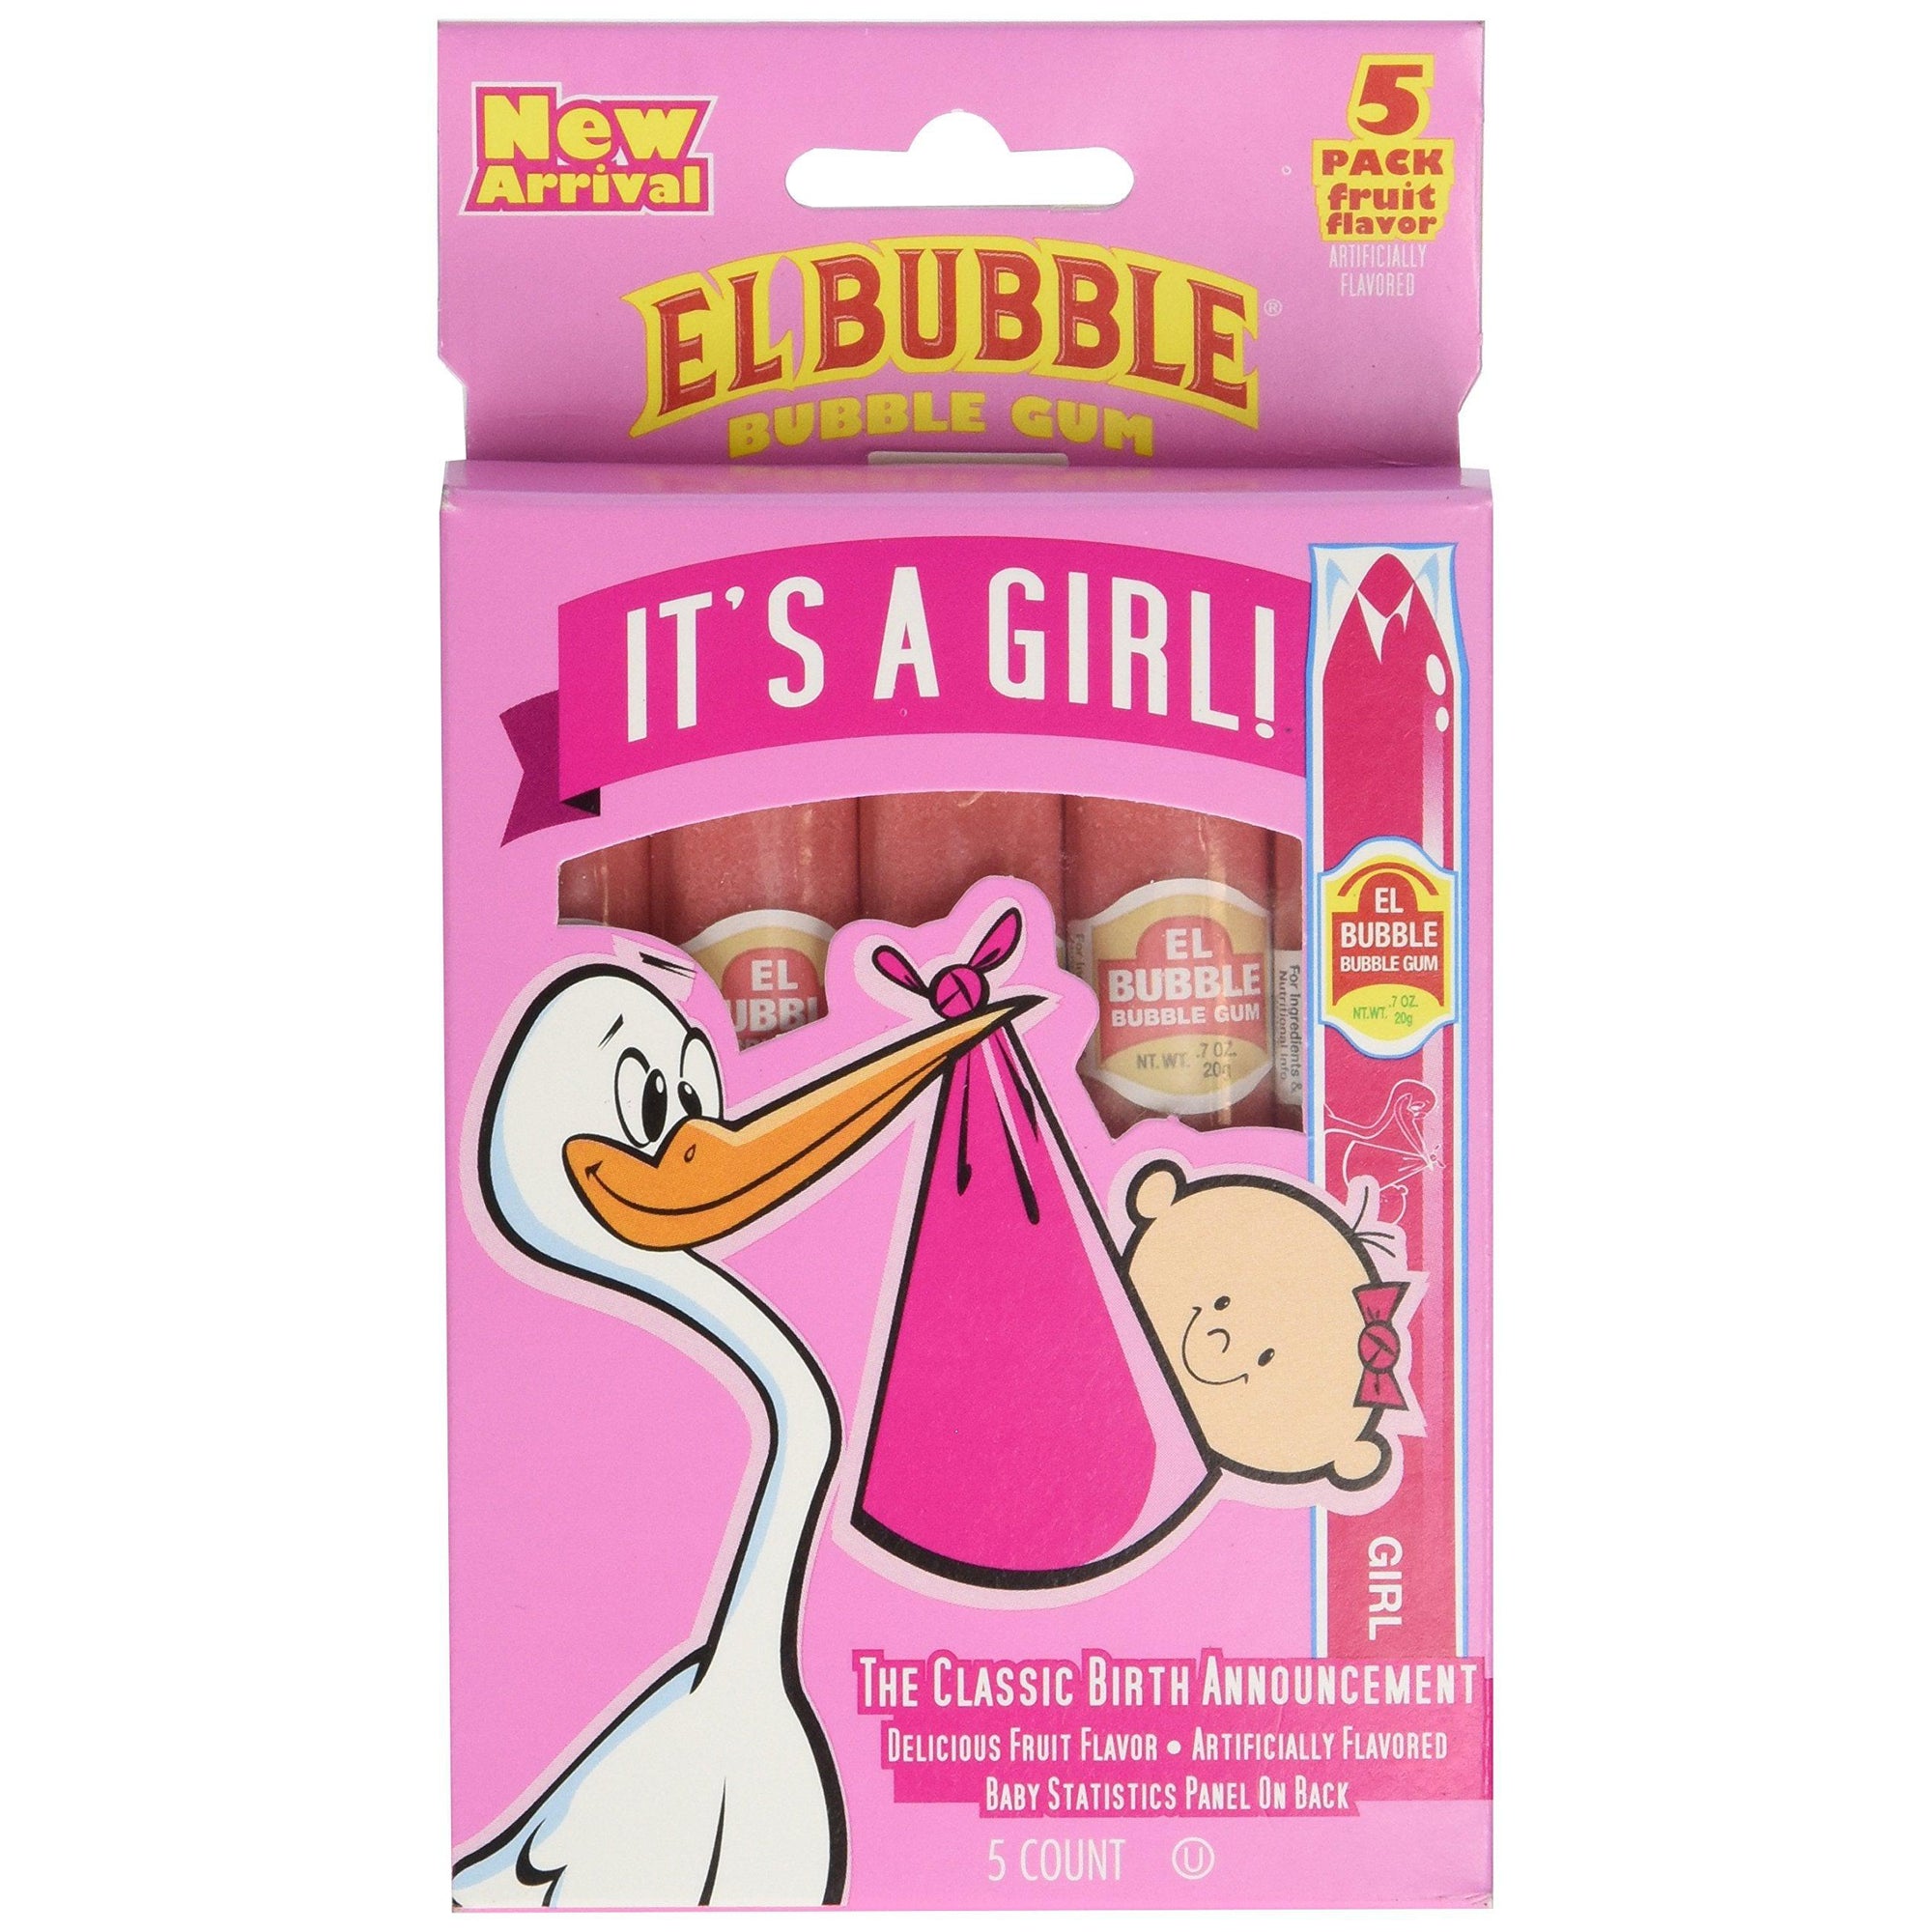 Front view of the Bubble Gum Cigar-It's A Girl -5 Pack in its box.